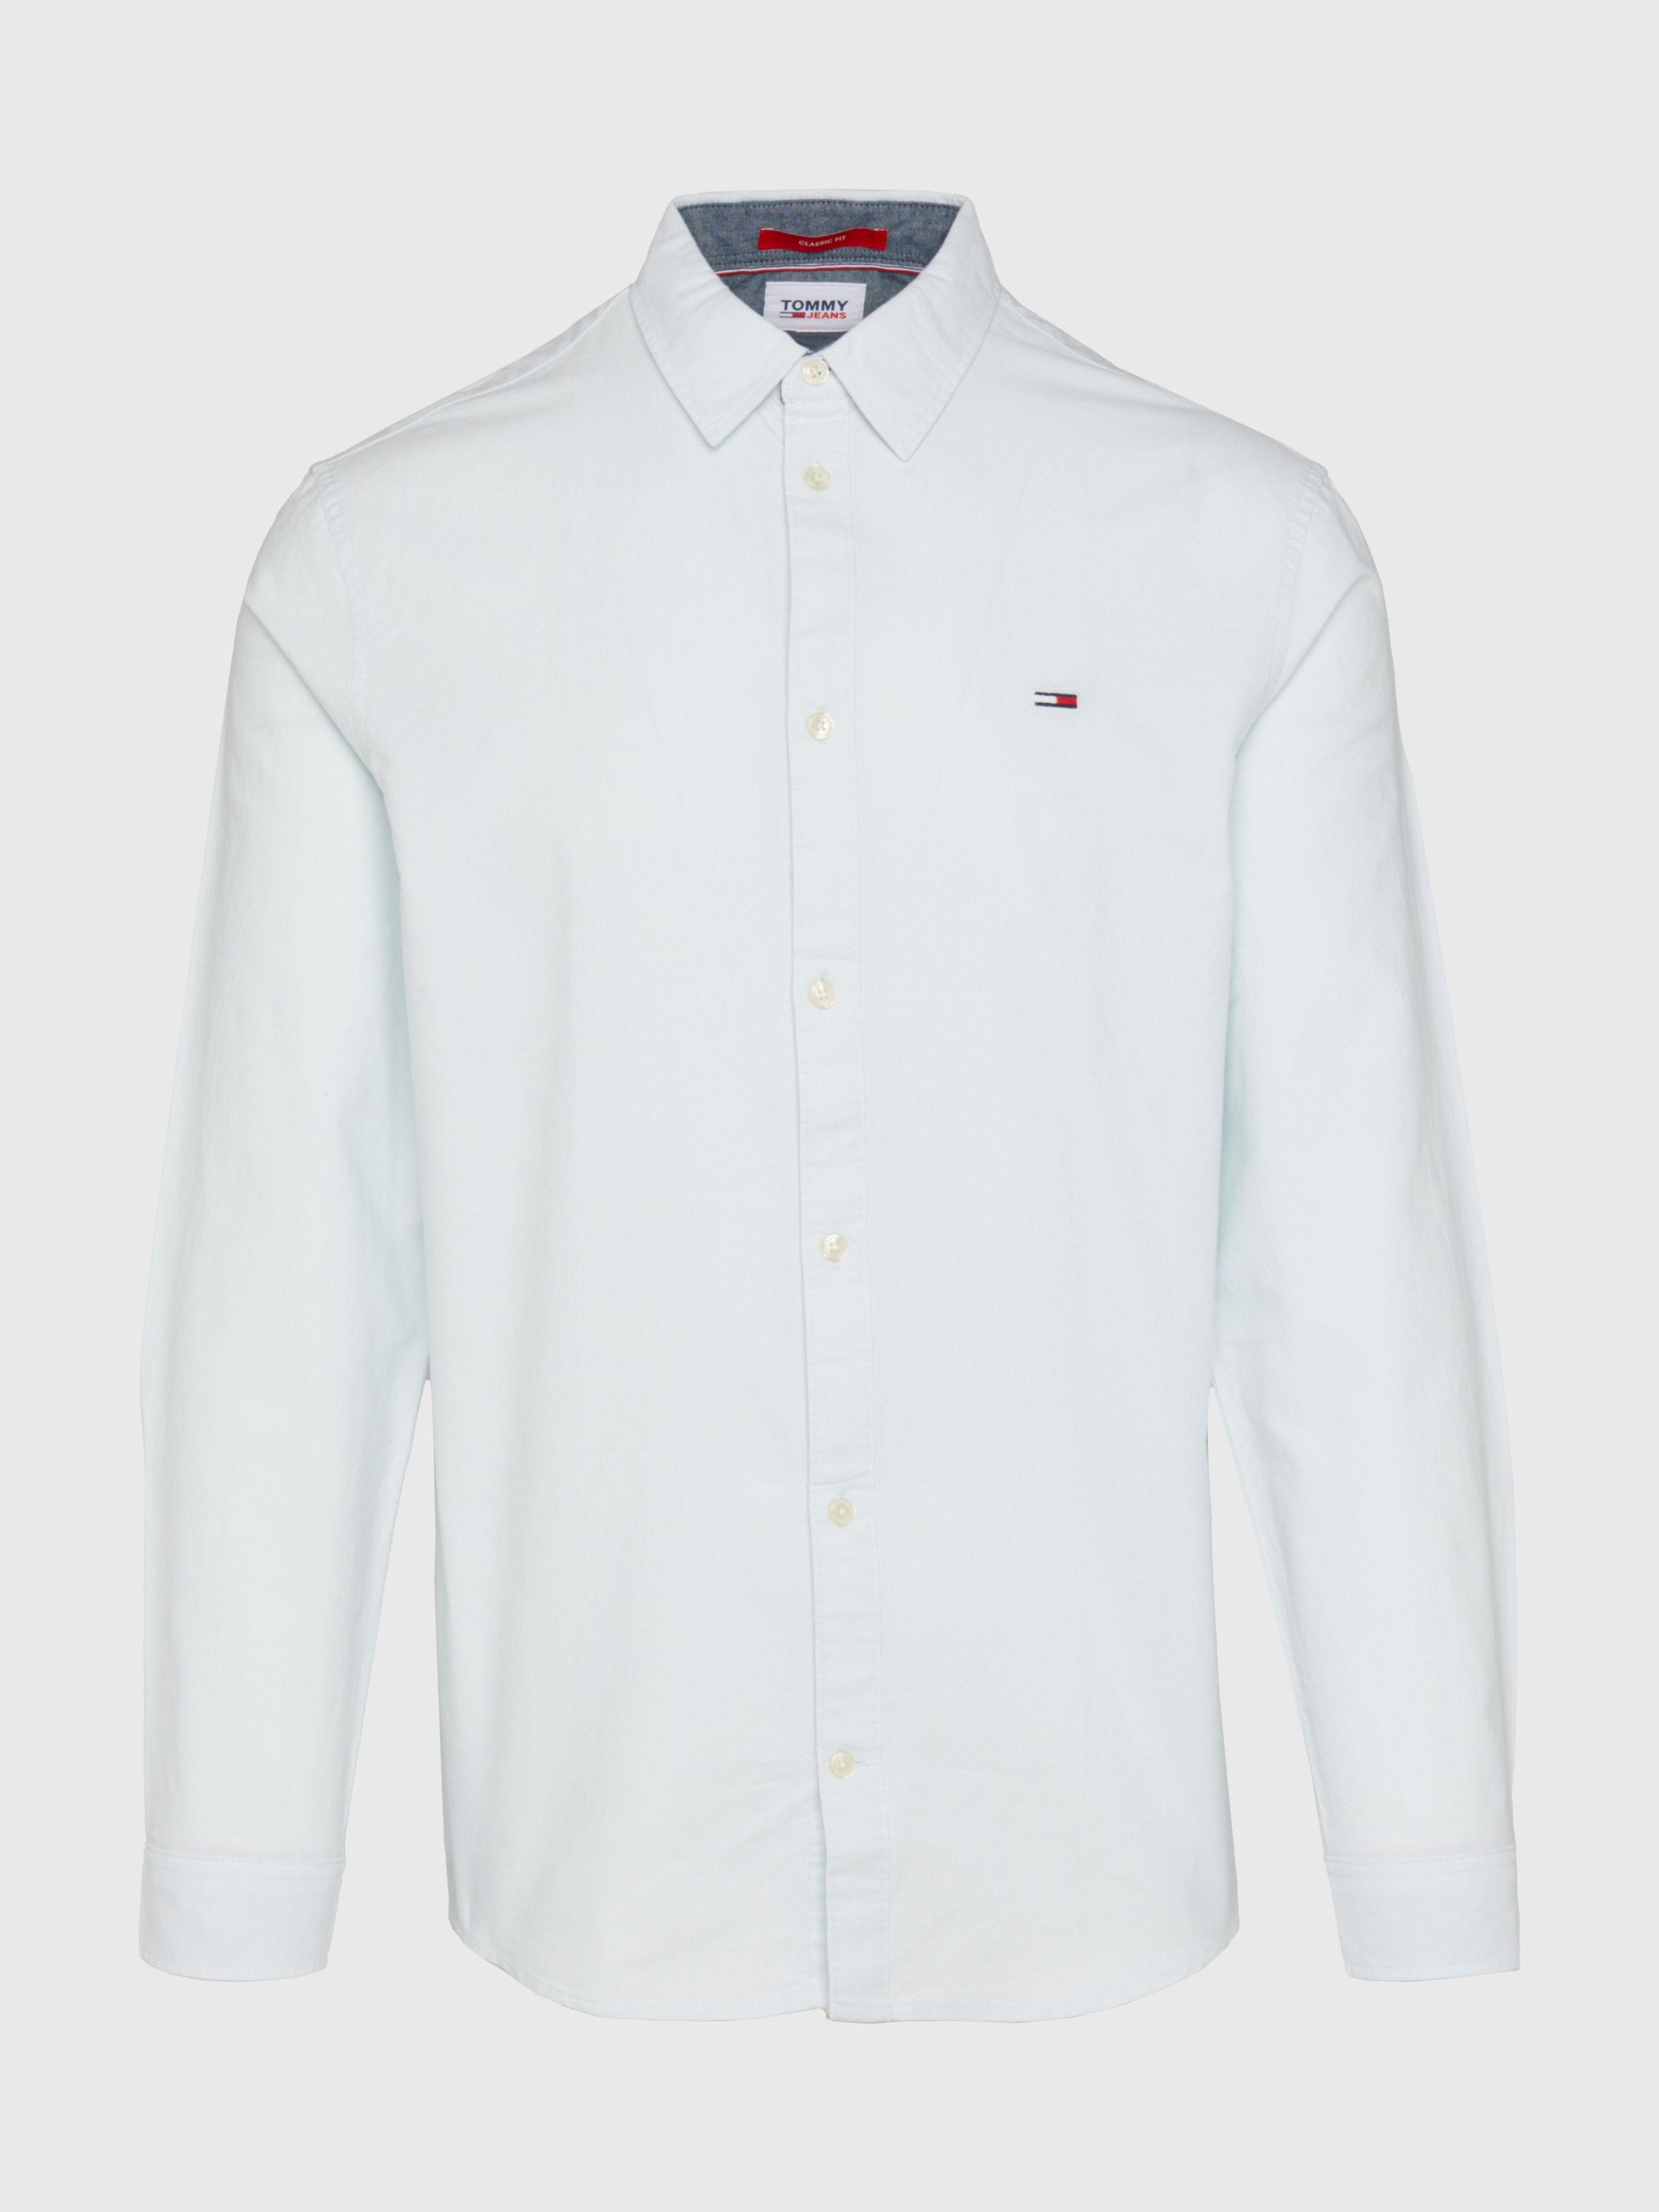 Essential Classic Fit Oxford Shirt | Tommy Hilfiger